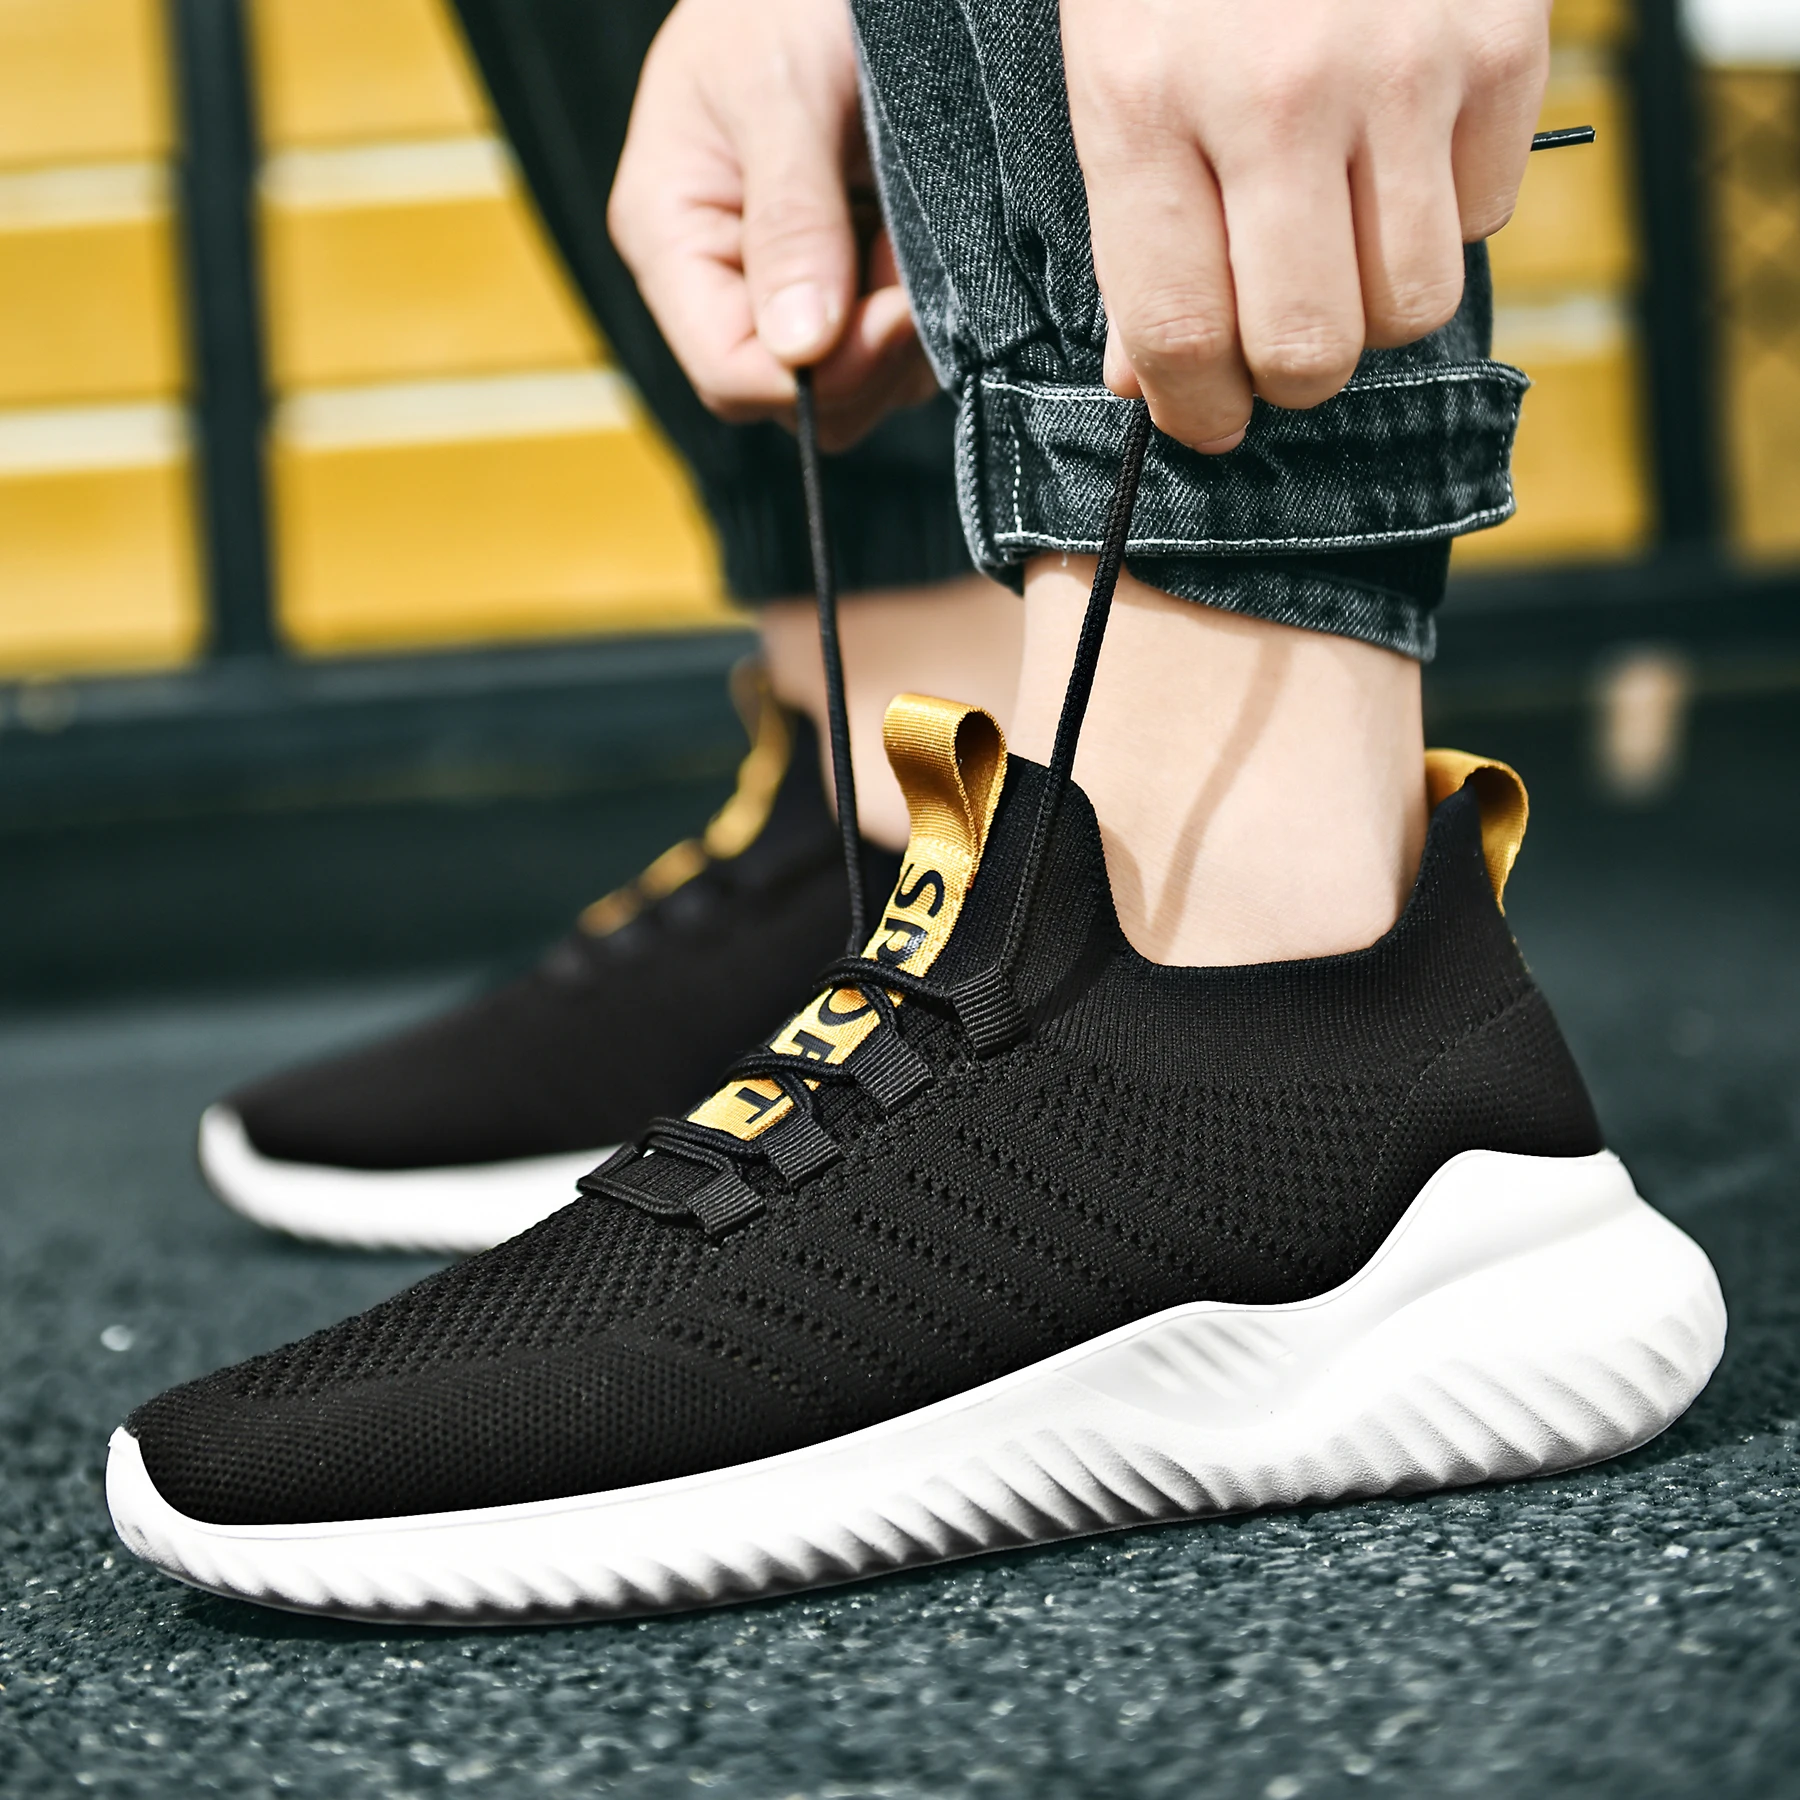 2021 New Men Casual Shoes Black White Shoes For Men Sneakers Lightweight Breathable Walking Tenis Masculino Zapatillas Hombre